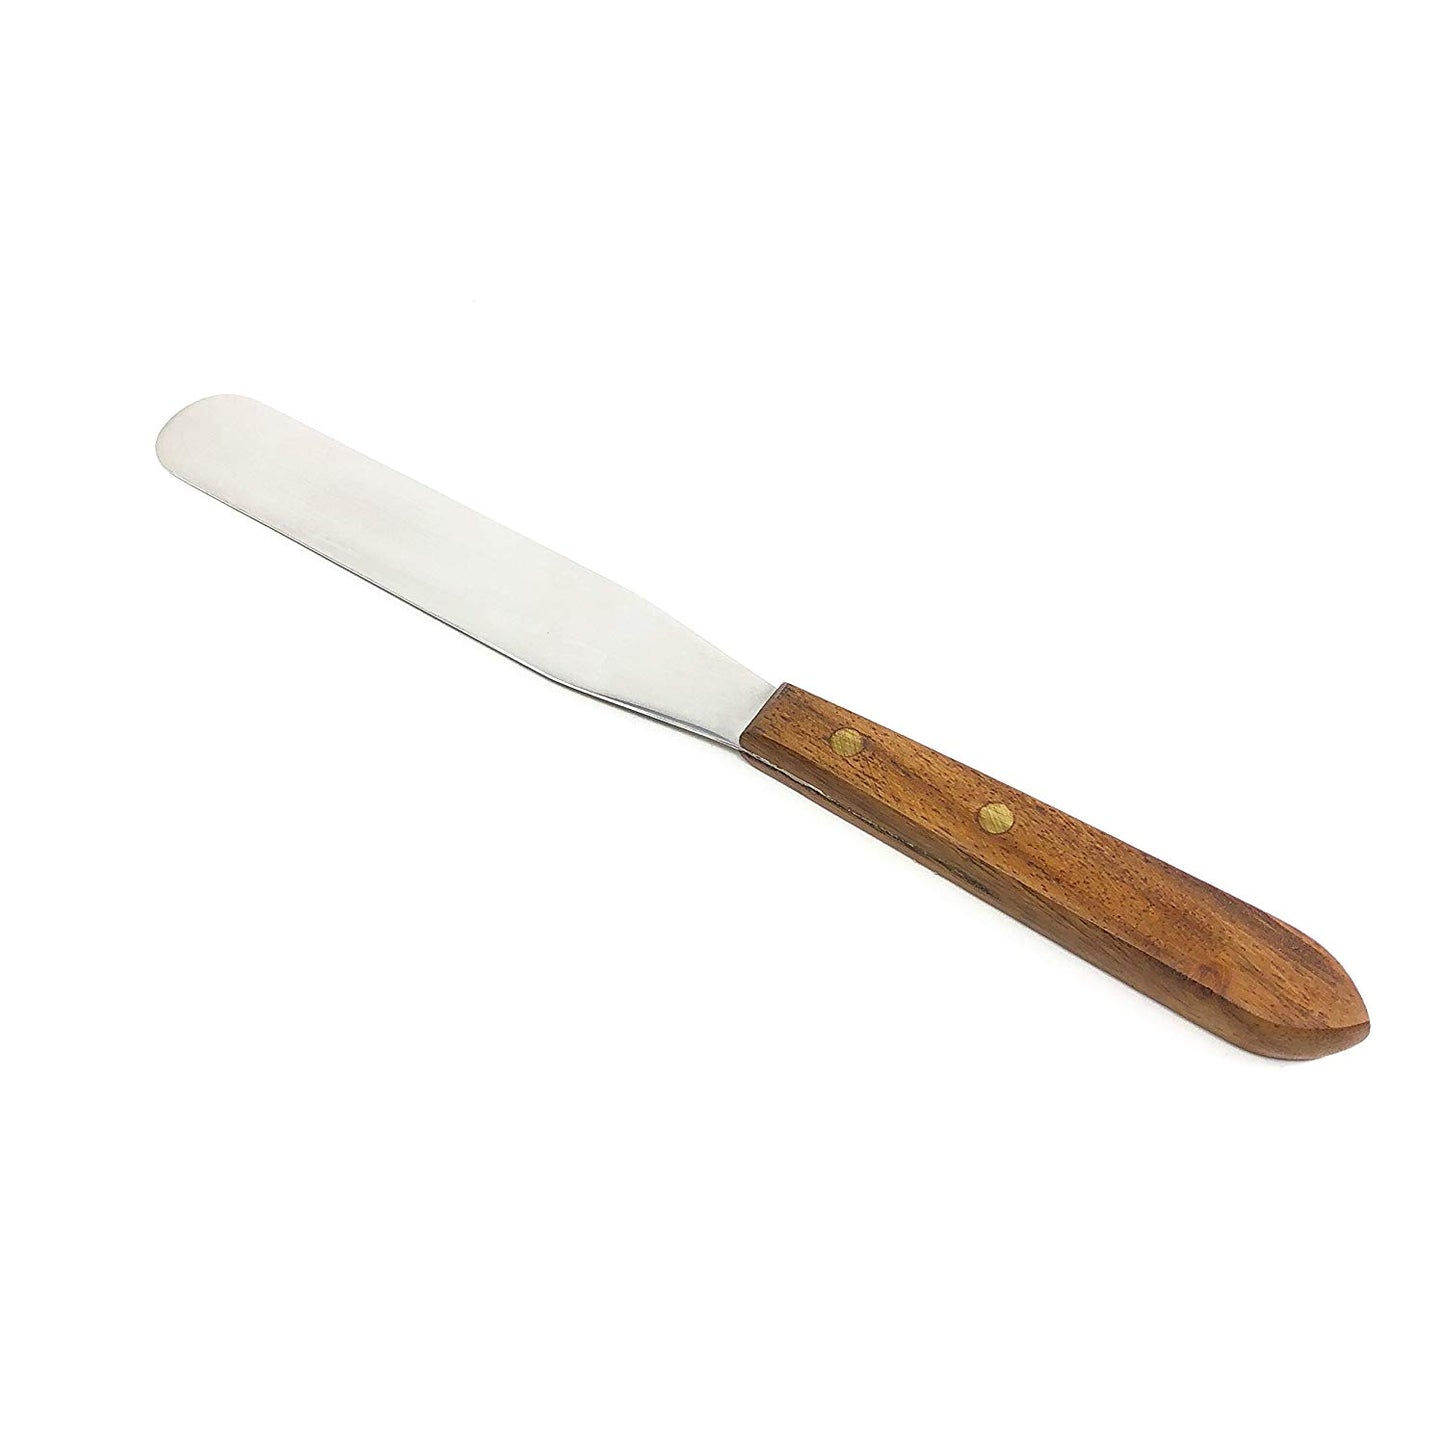 IMS-WHSPT12 Lab Spatula Wooden Handle, 12" Stainless Steel Blade, Brass Rivets